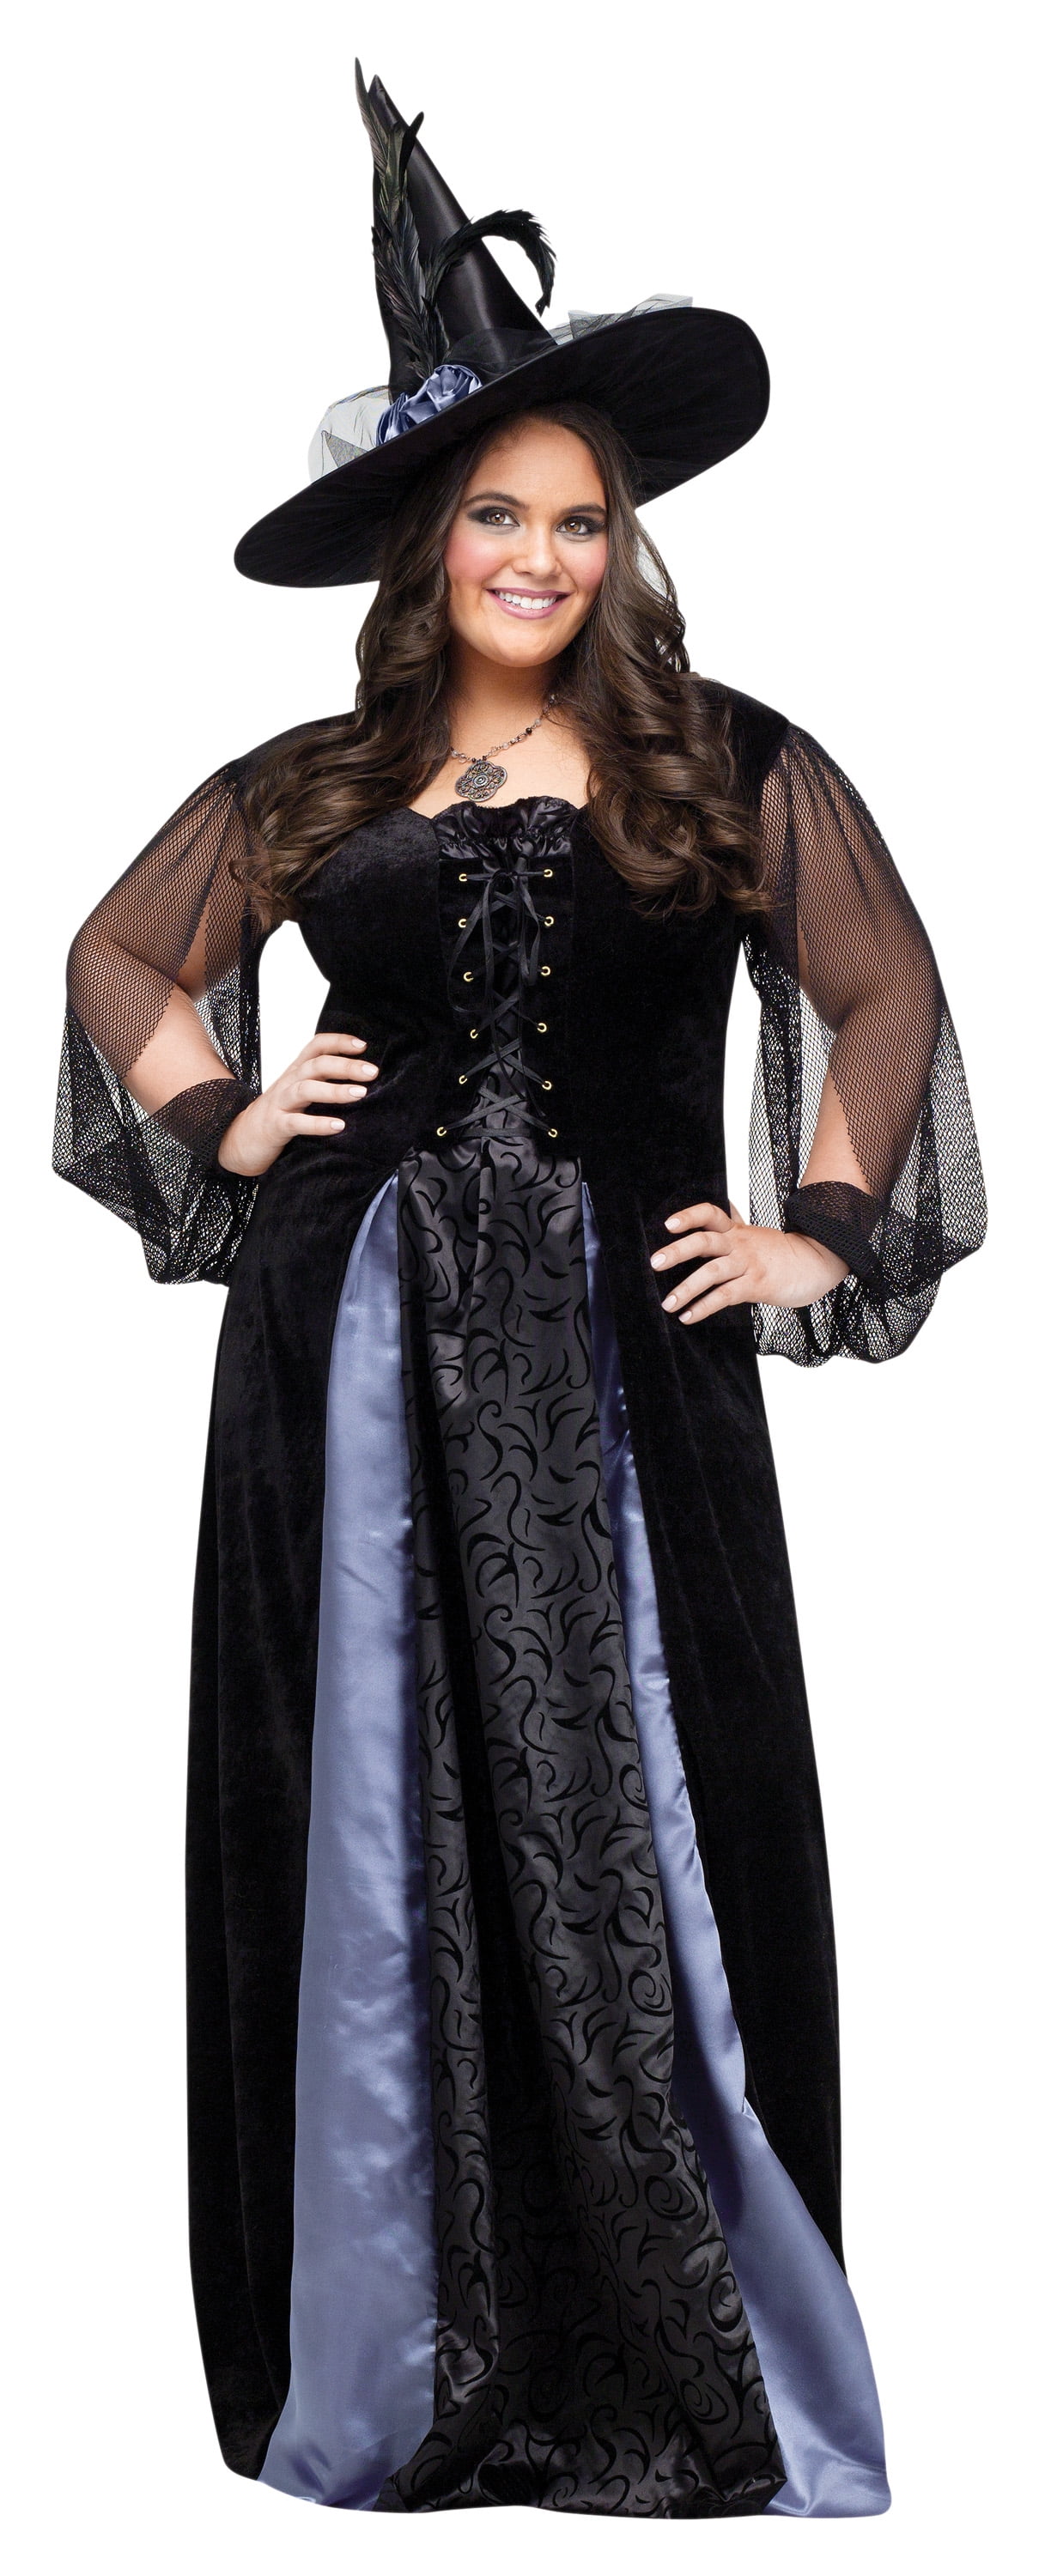  Halloween  Womens Gothic Witch Costume  by Fun World Size 